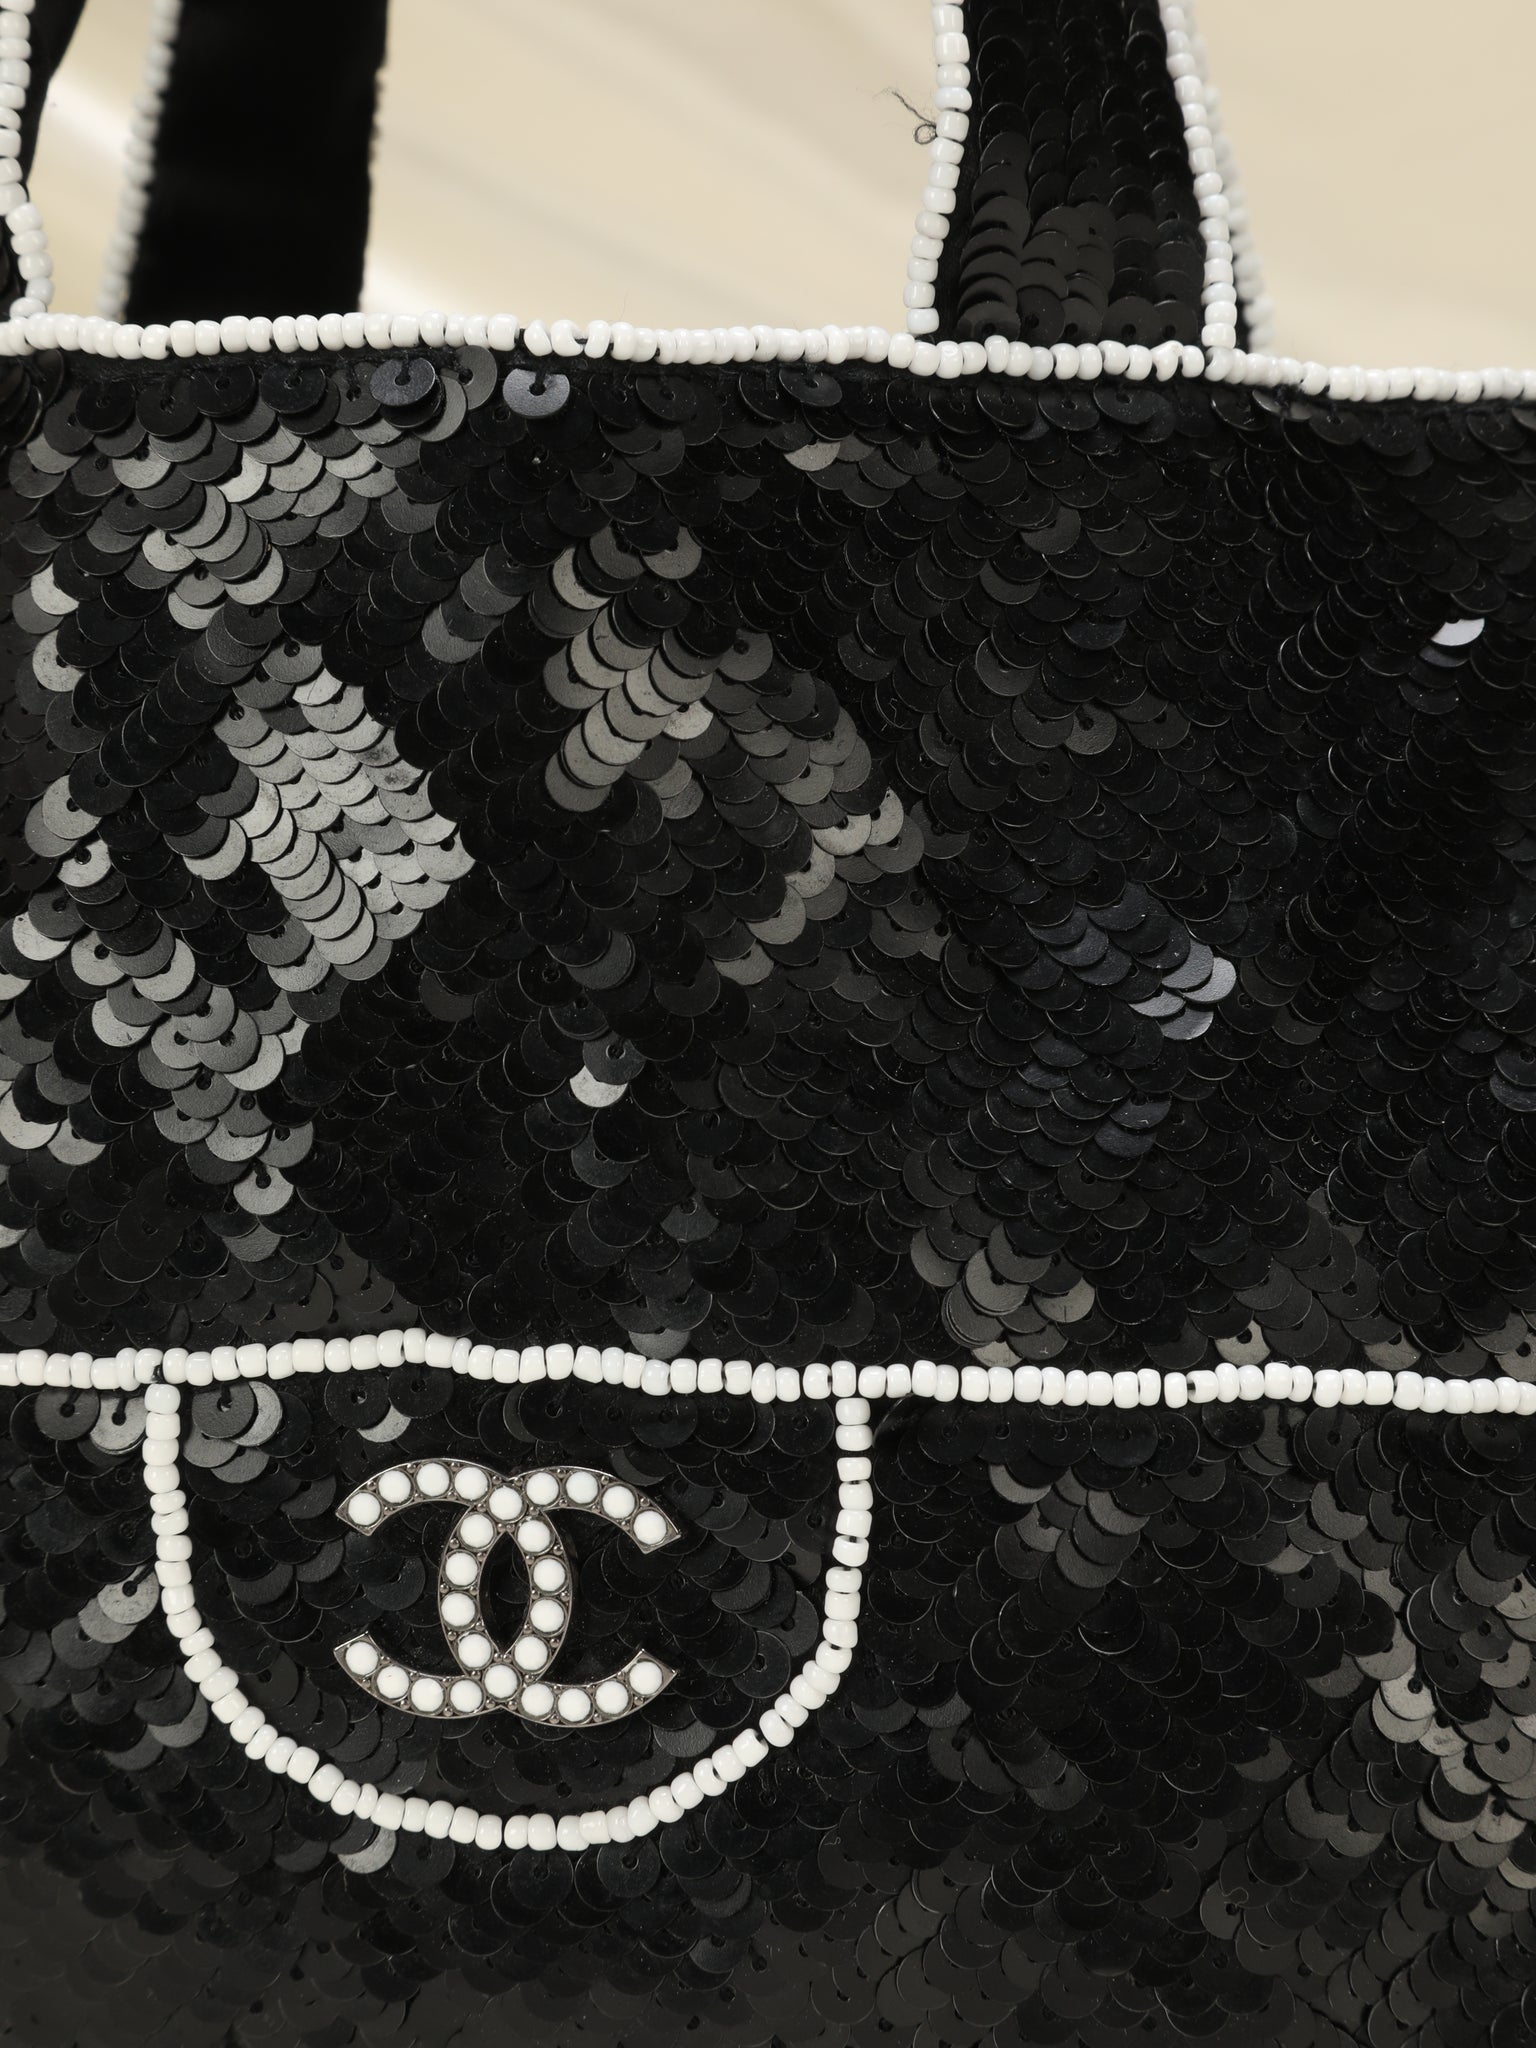 Extremely Rare Chanel Sequin Beaded Mini Bag